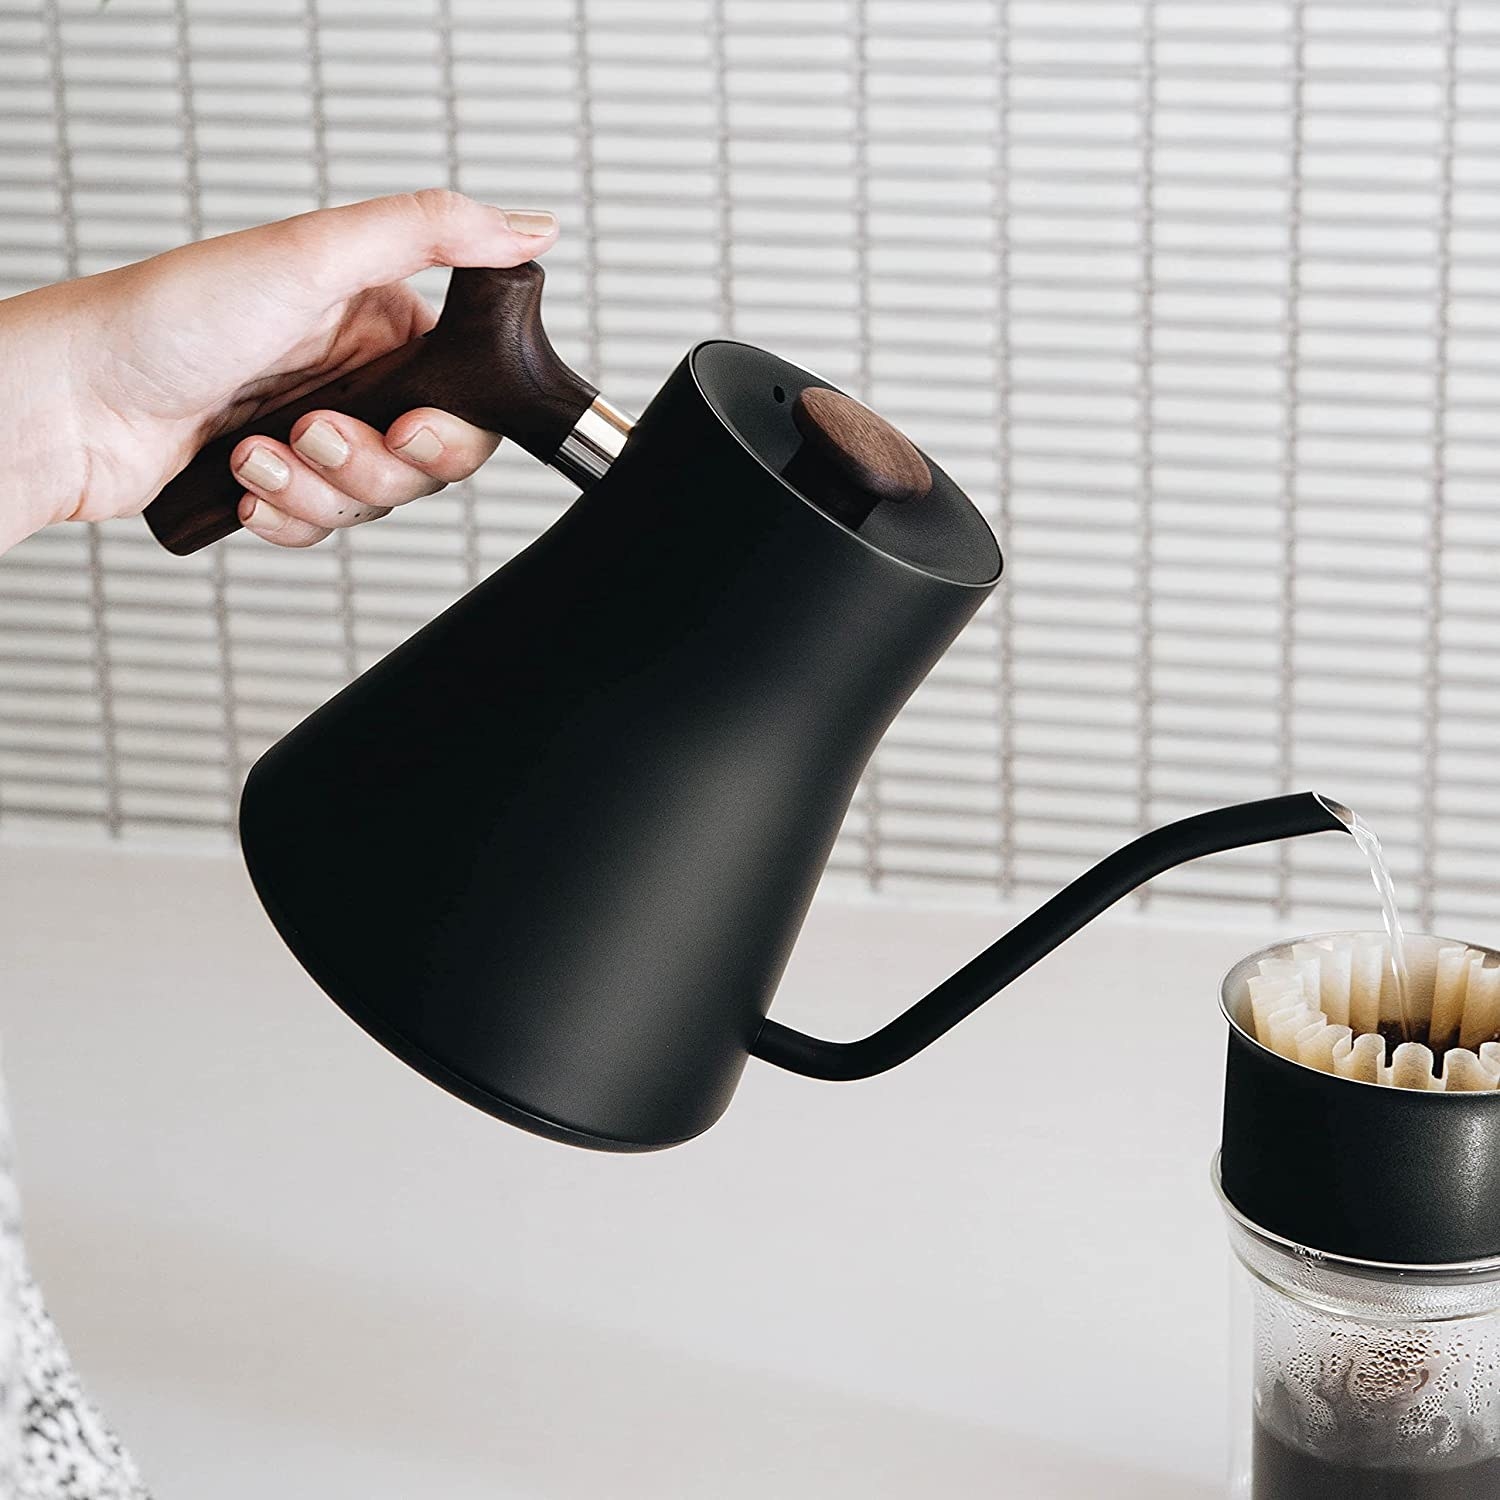 a person using the fellow kettle to make pour over coffee